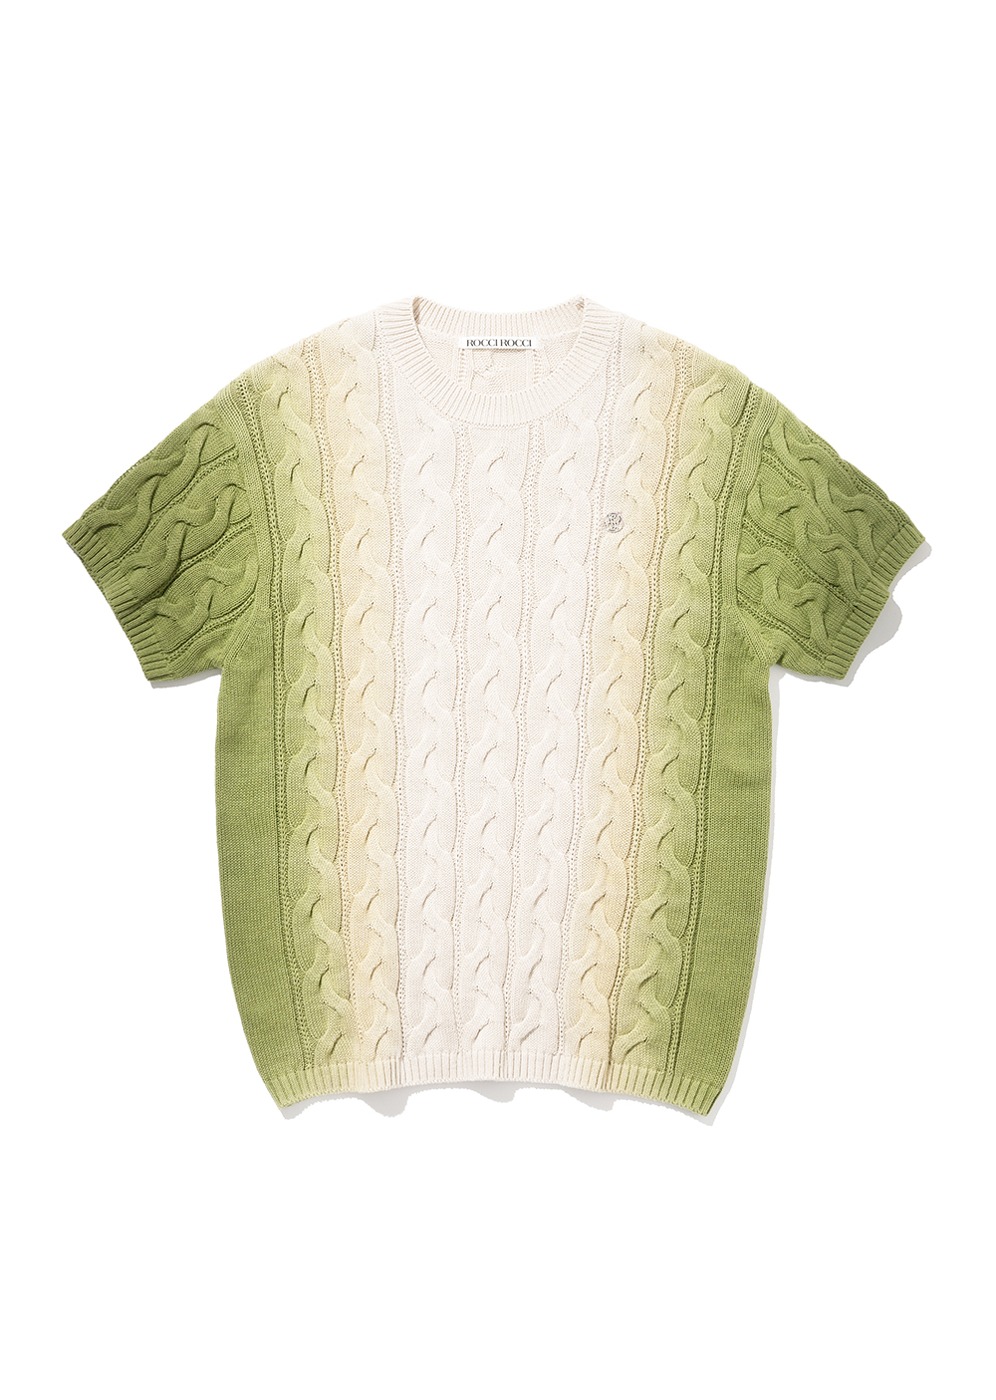 Gradation Washing Cable Knit Top [GREEN]Gradation Washing Cable Knit Top [GREEN]로씨로씨